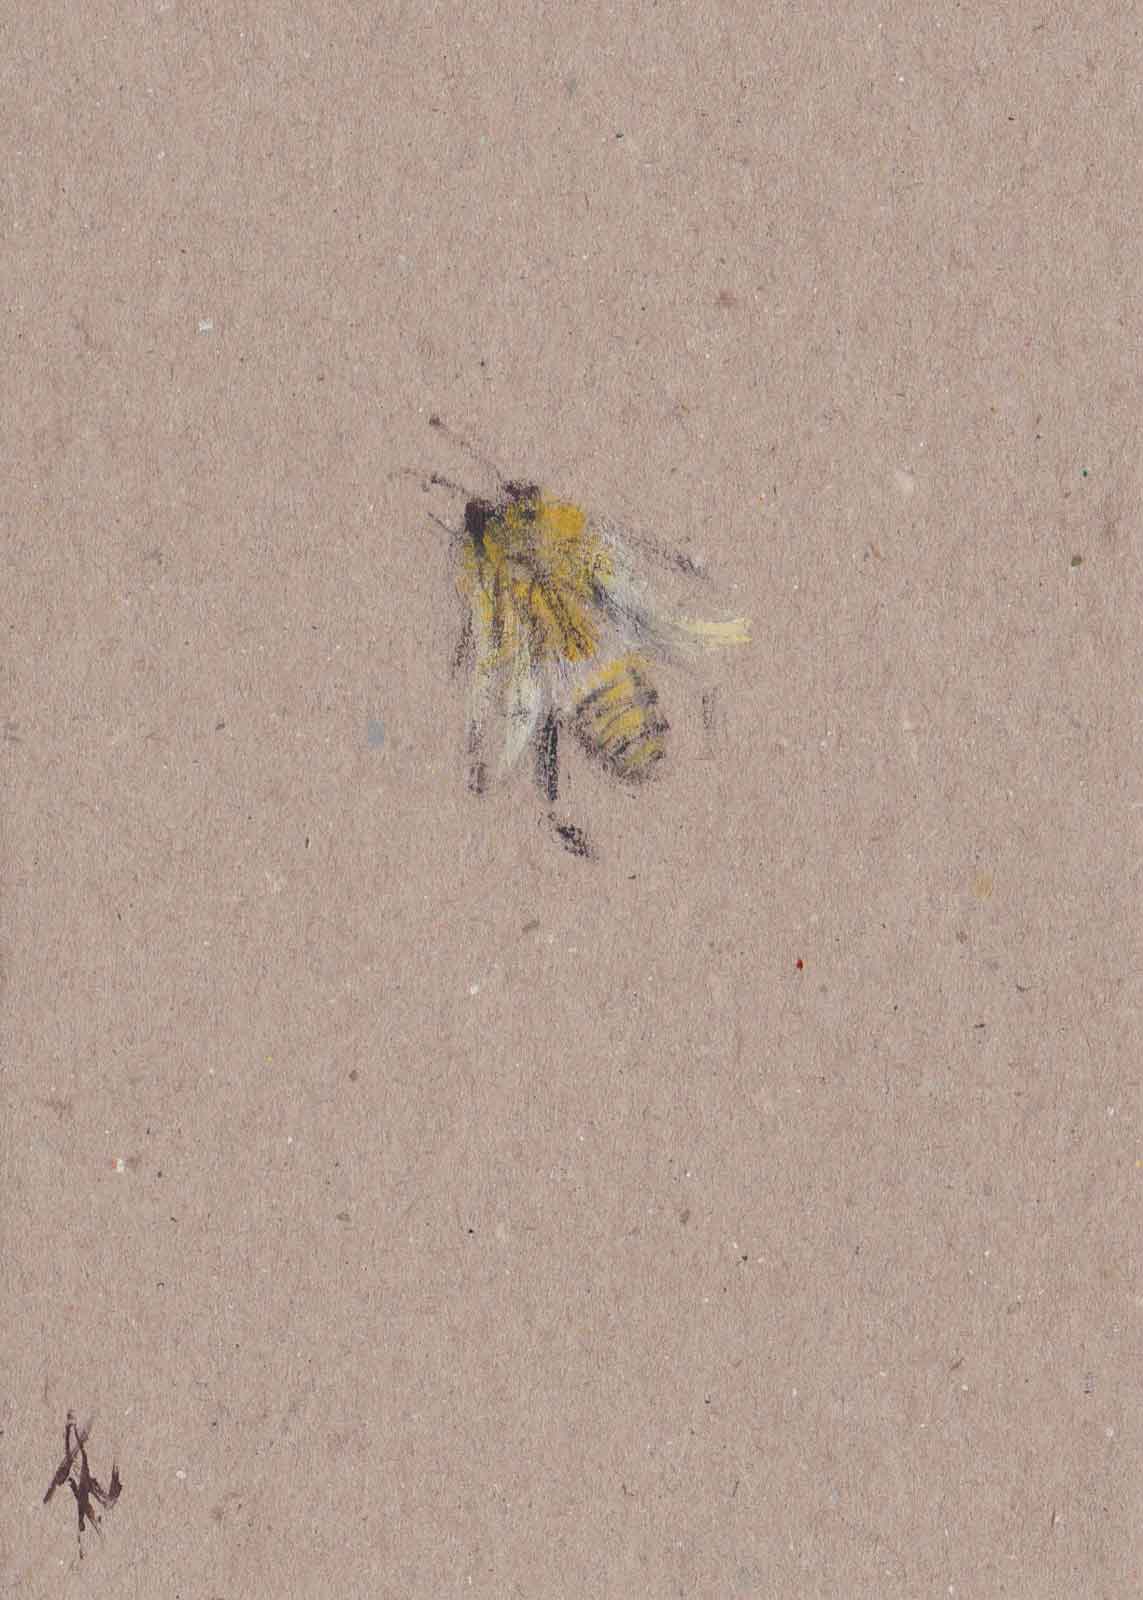 Hand-painted insect note card